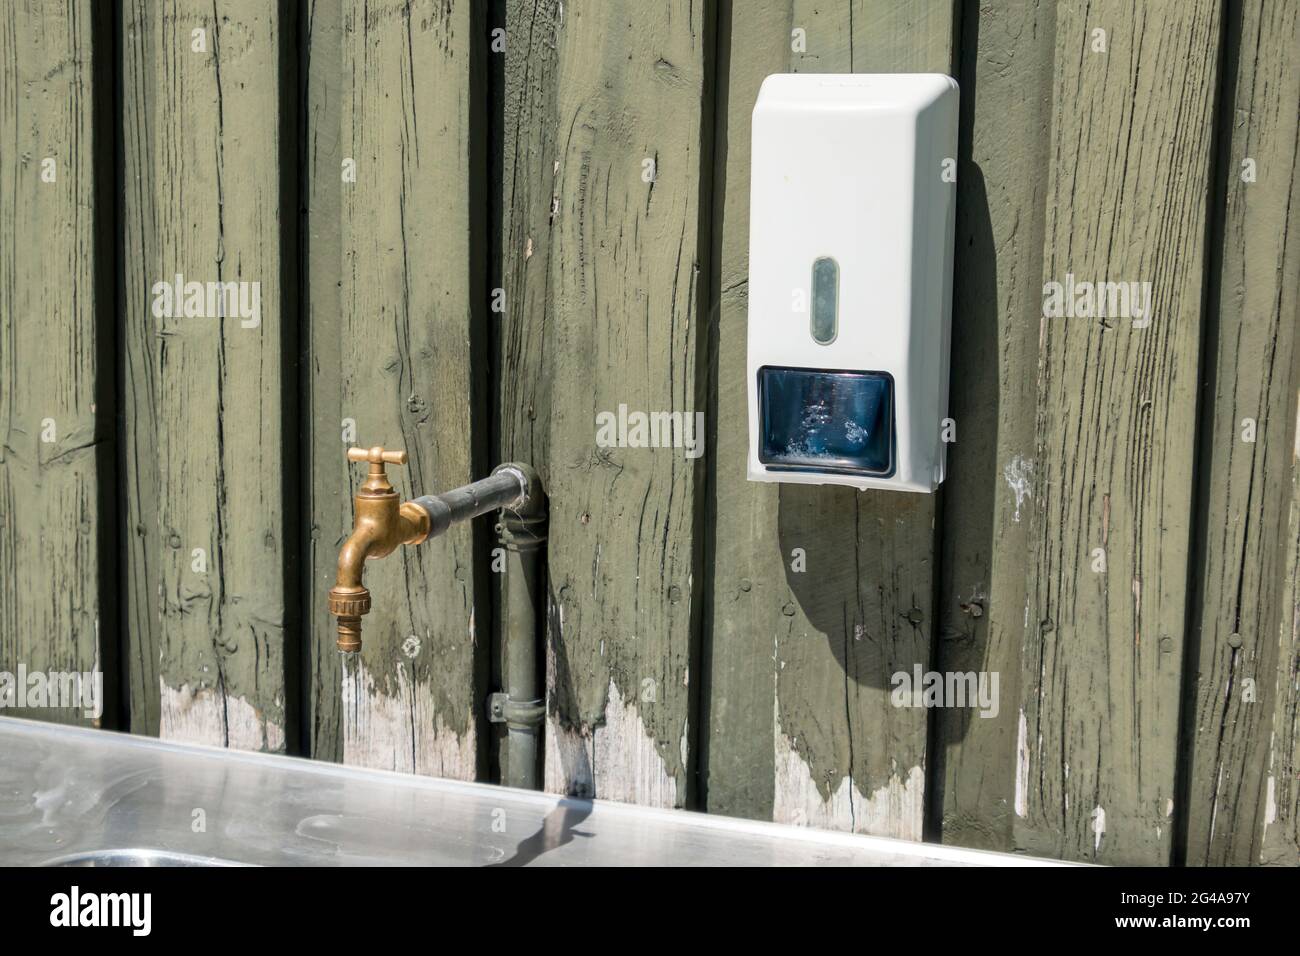 Ry, Denmark - June 16 2021: Old brass faucet and an alcohol dispenser over a sink Stock Photo